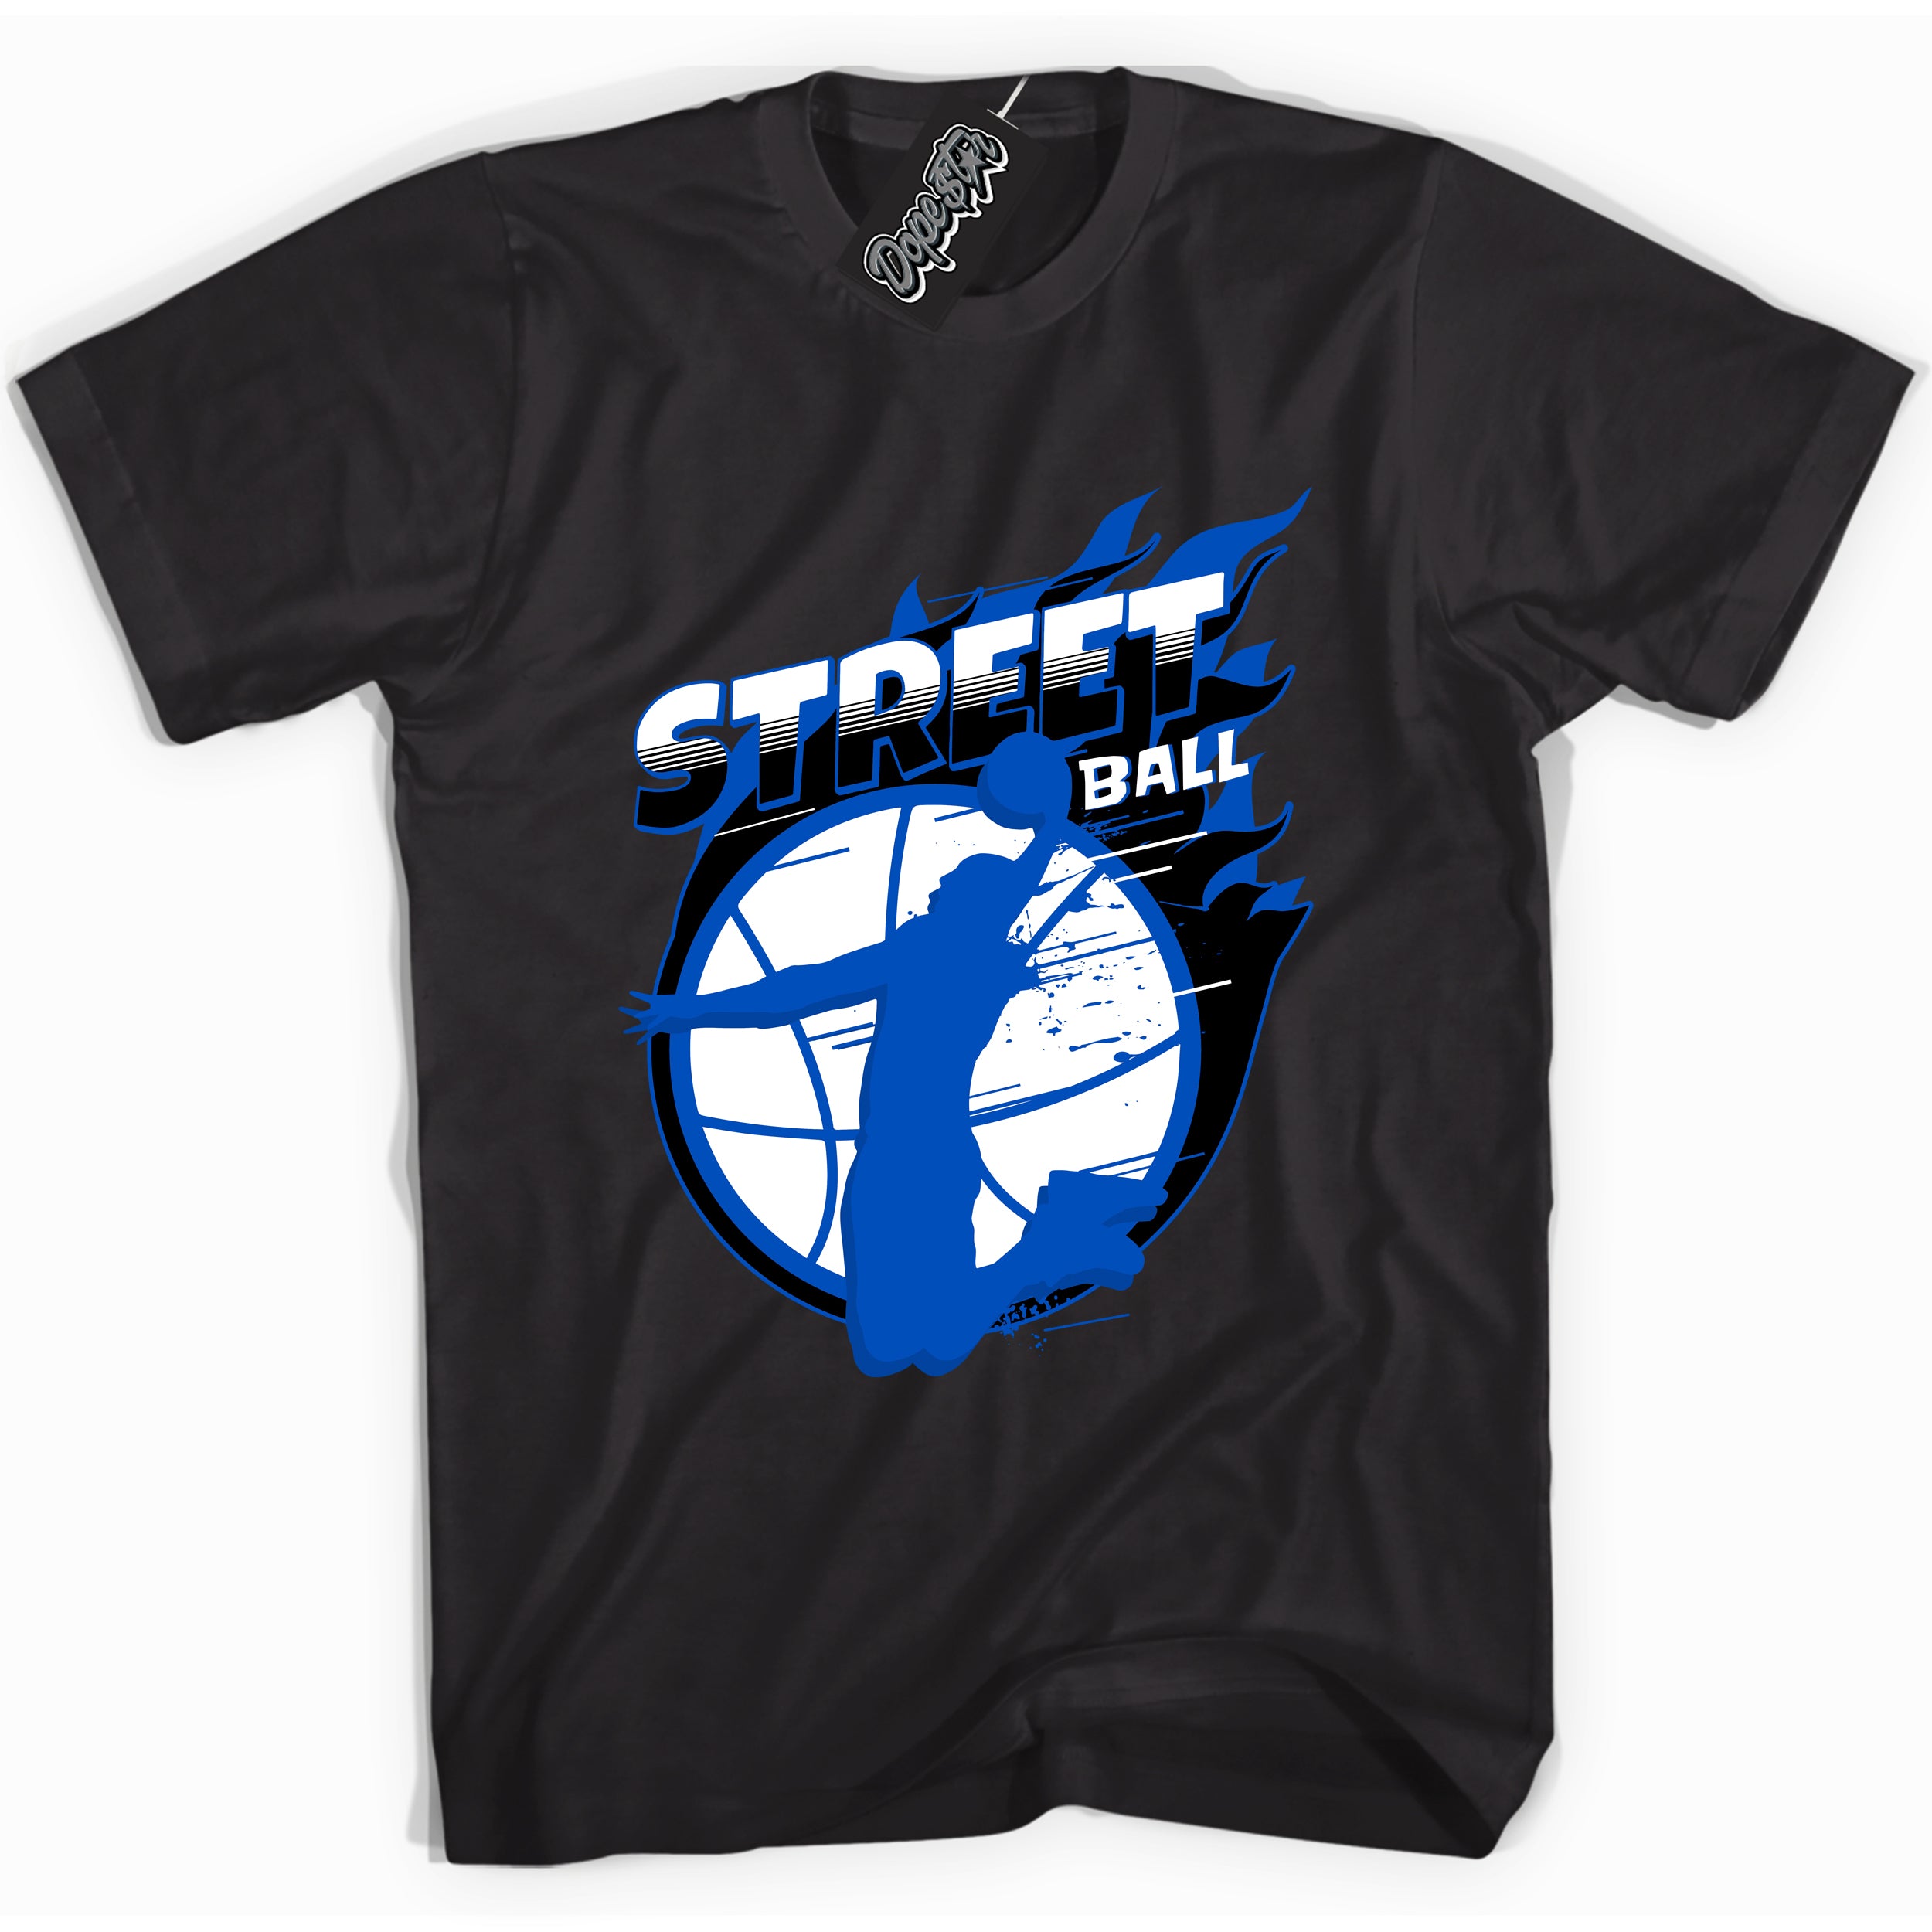 Cool Black graphic tee with "Street Ball" design, that perfectly matches Royal Reimagined 1s sneakers 